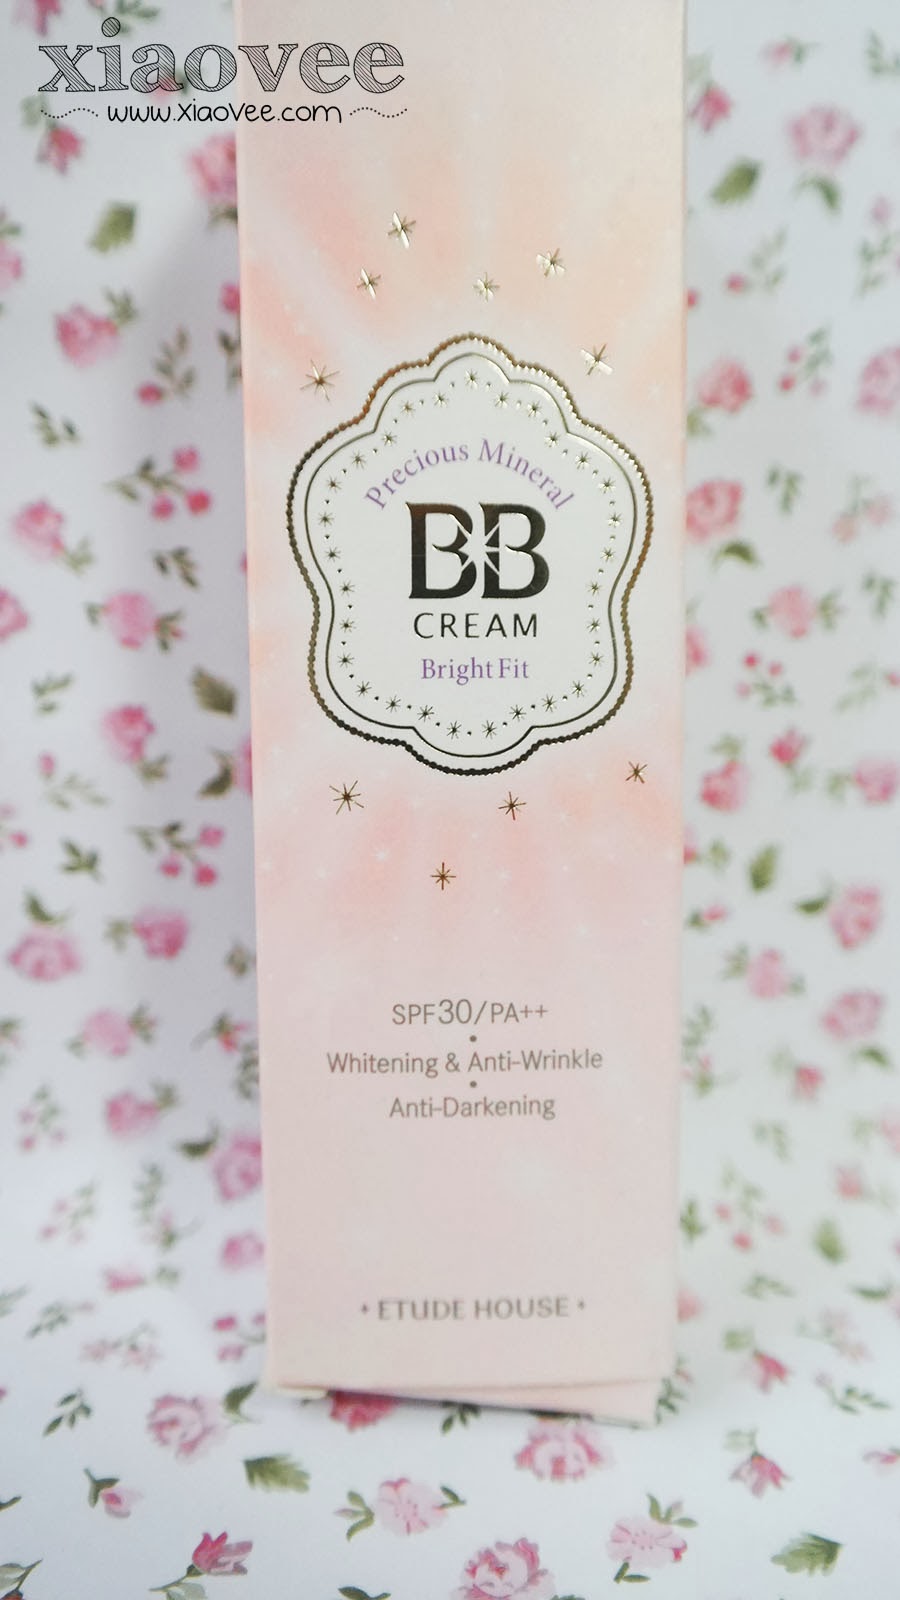 Xiao Vee: Indonesian Beauty Blogger: Etude House Precious Mineral BB Cream  Bright Fit [review]